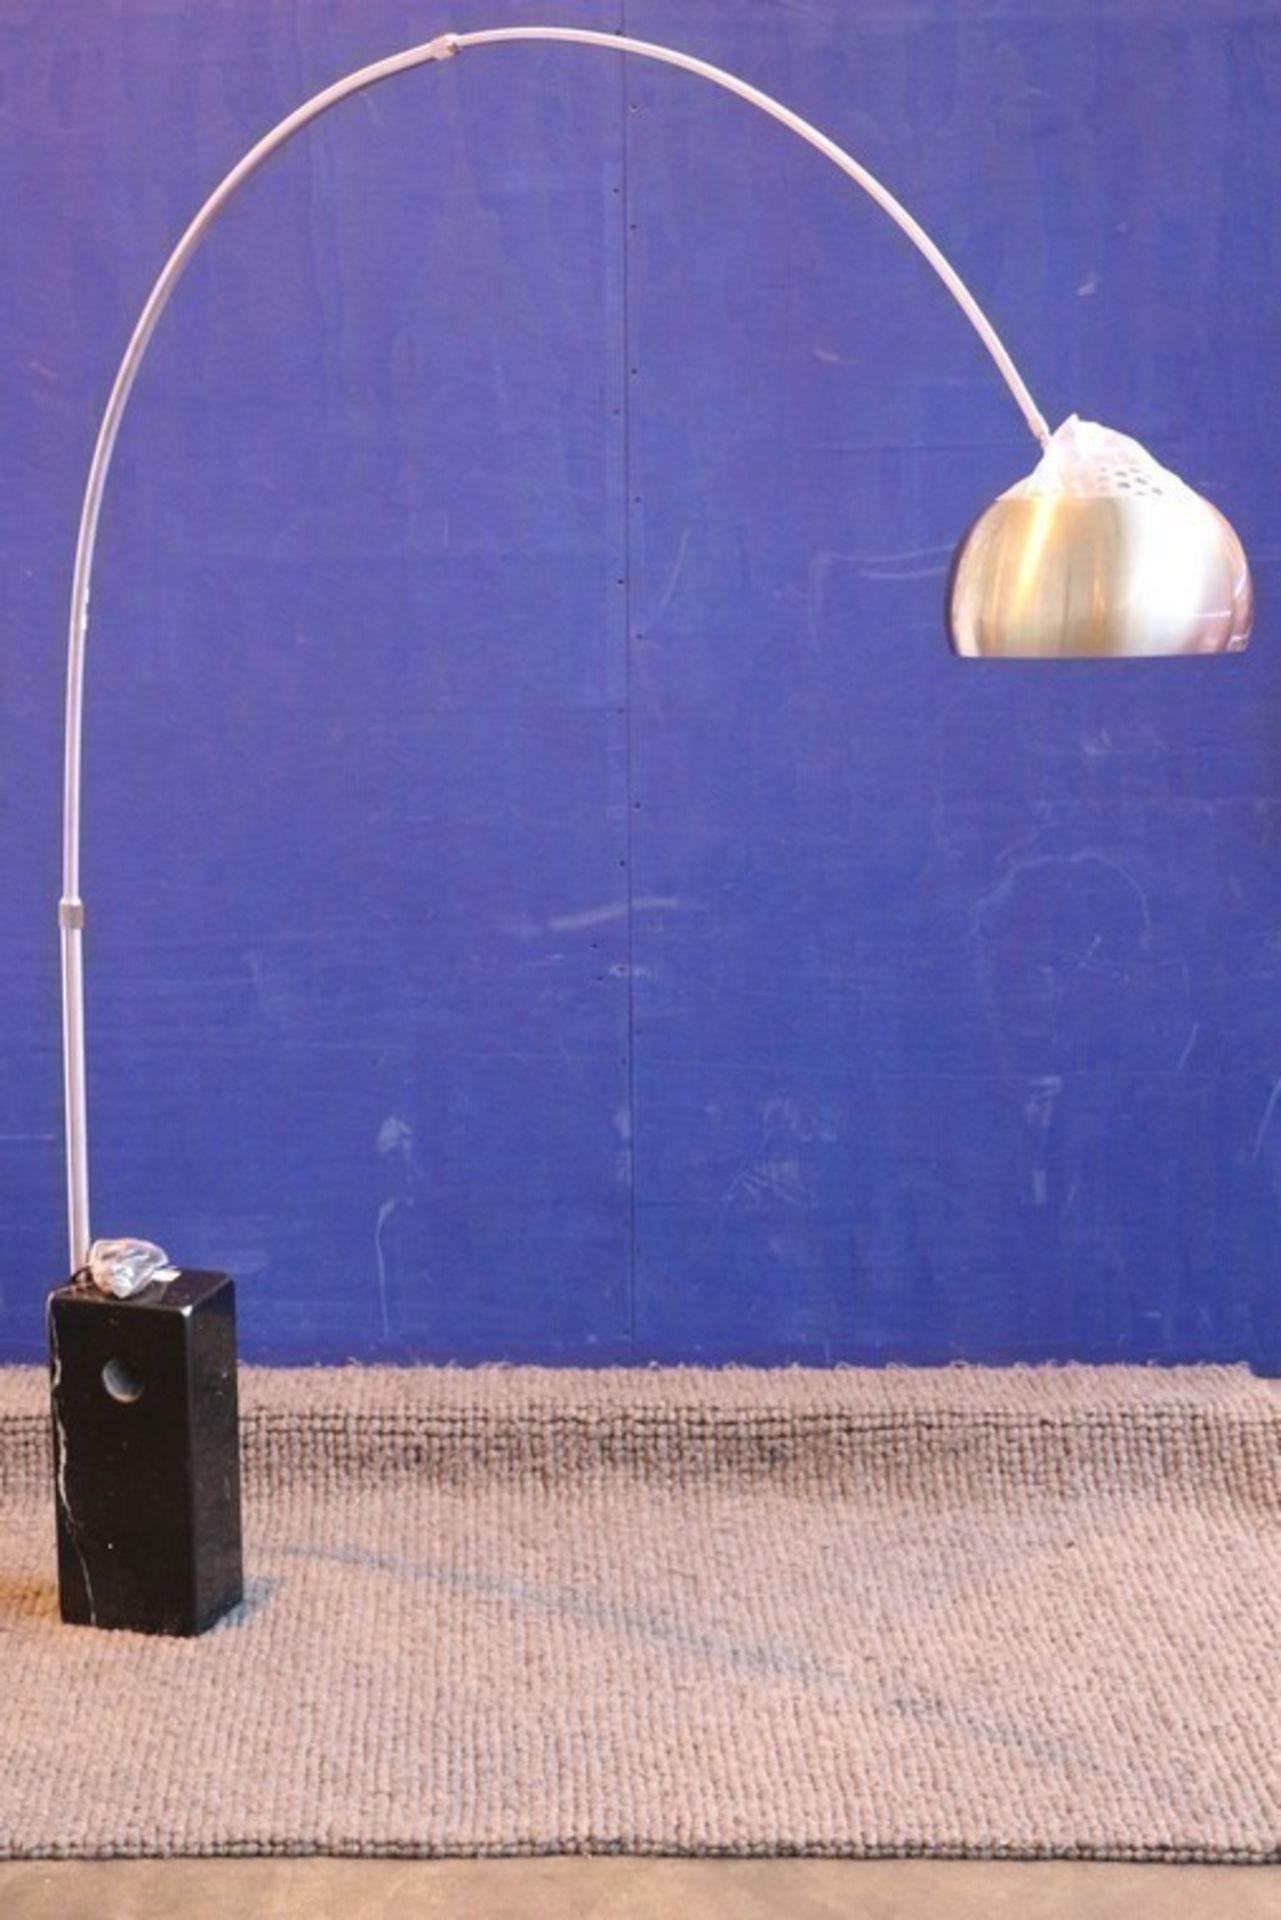 1 x MARBLE AND STAINLESS STEEL BRAND NEW ROMAN CONRAD COLLECTION LARGE ARCHED FLOOR LAMP (0164-L) *